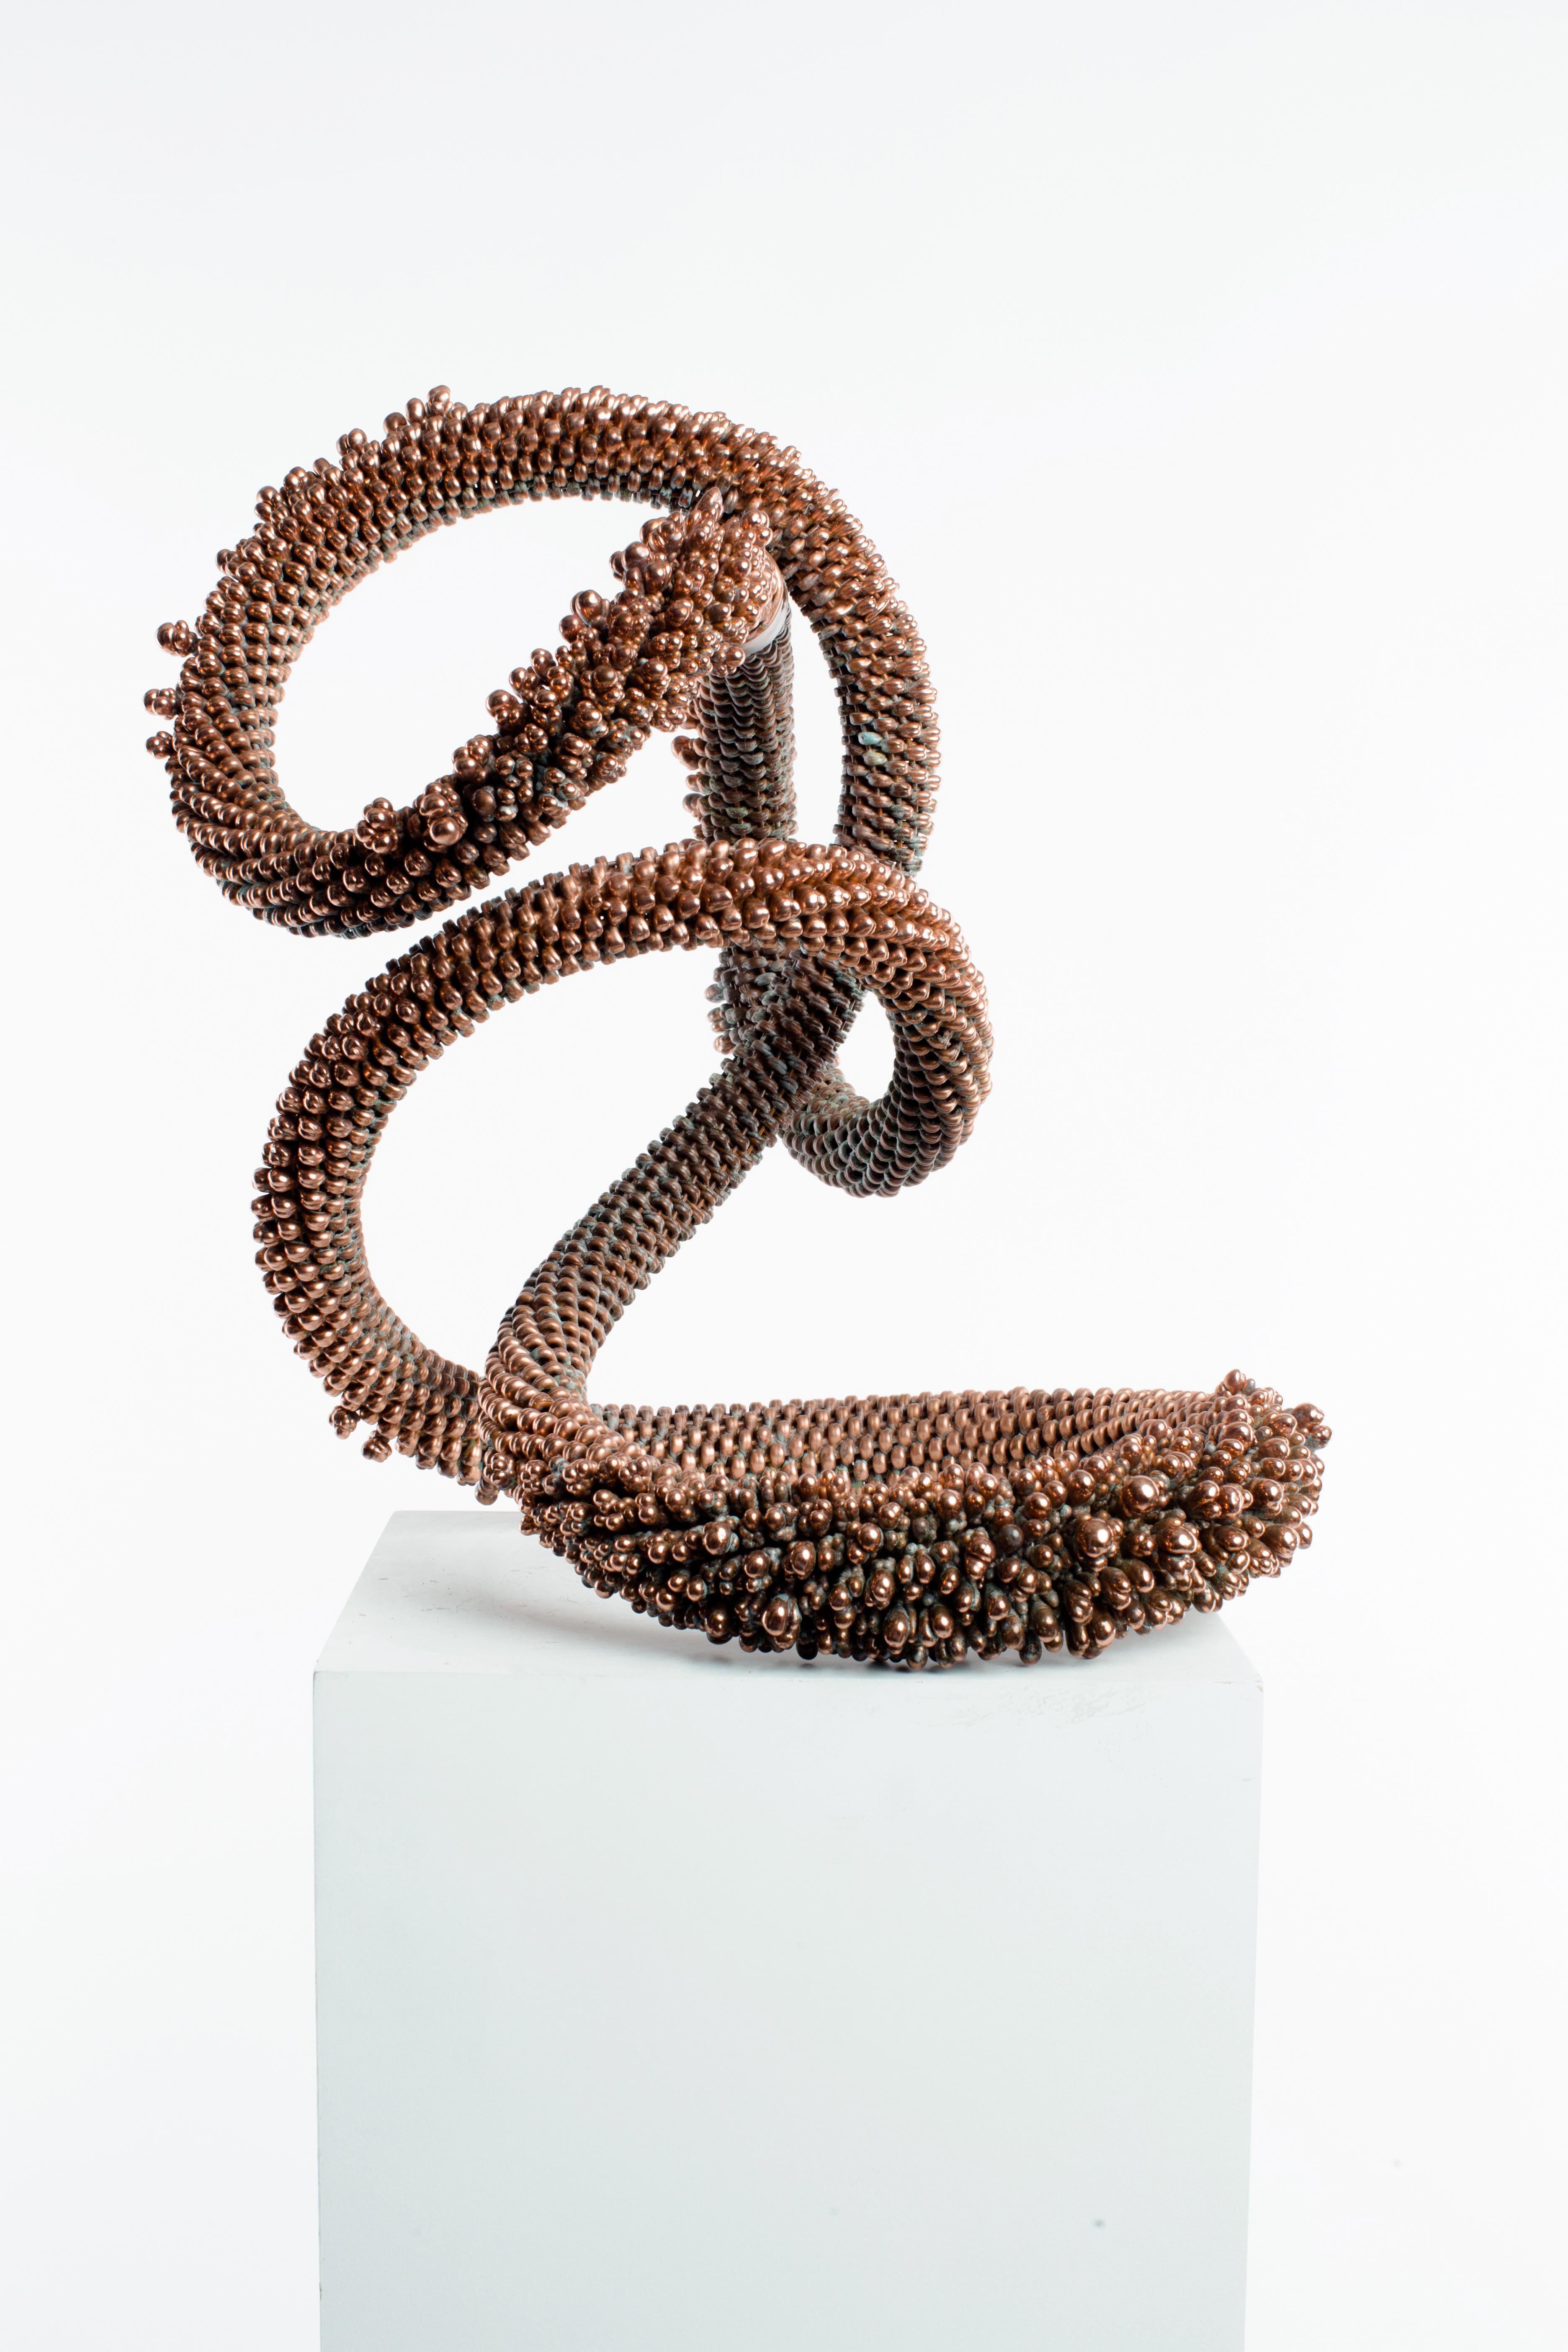 Copper, Crystal, Polished, Raw, Abstract, Contemporary, Modern, Art - Sculpture by Driaan Claassen